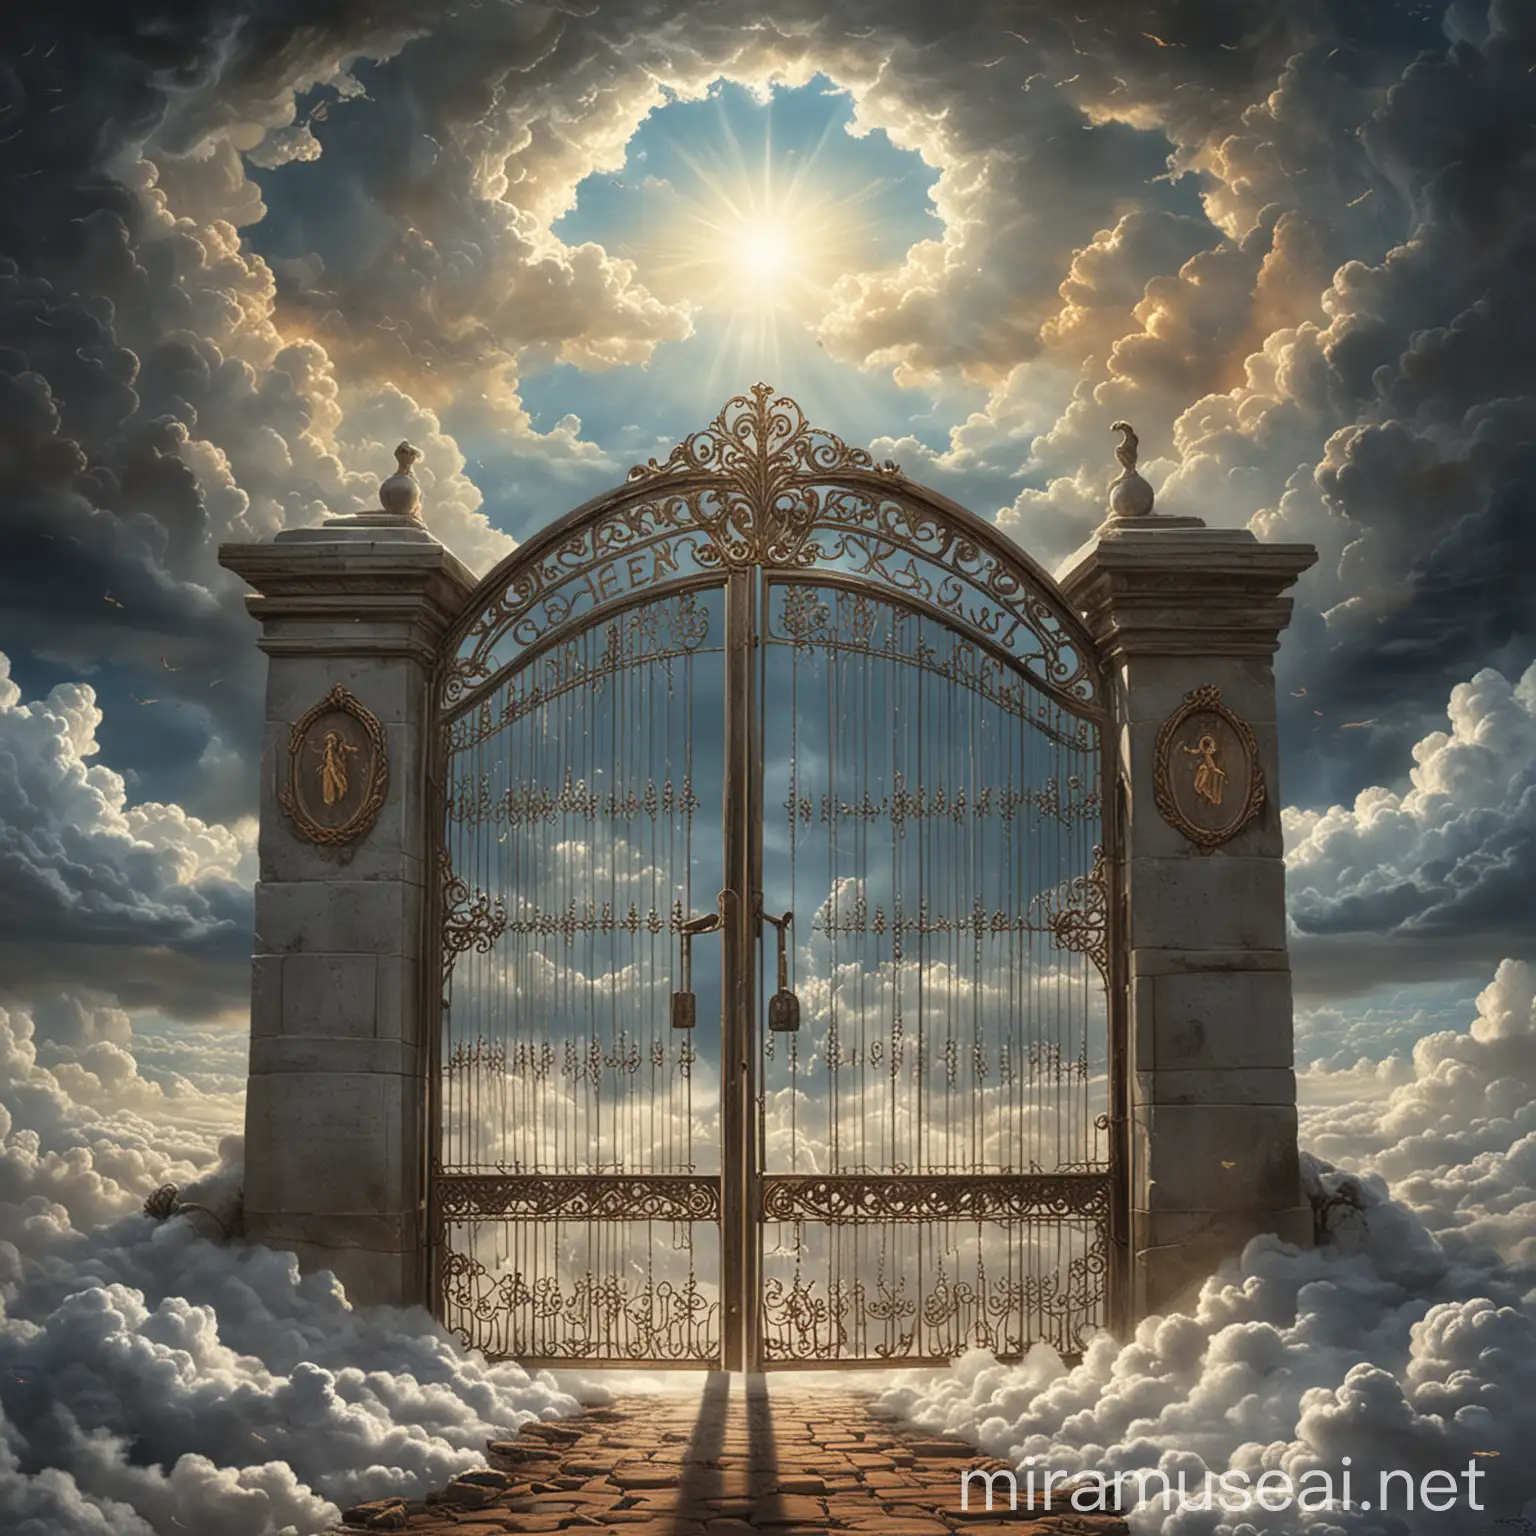 Majestic Gates Opening to Heavenly Light